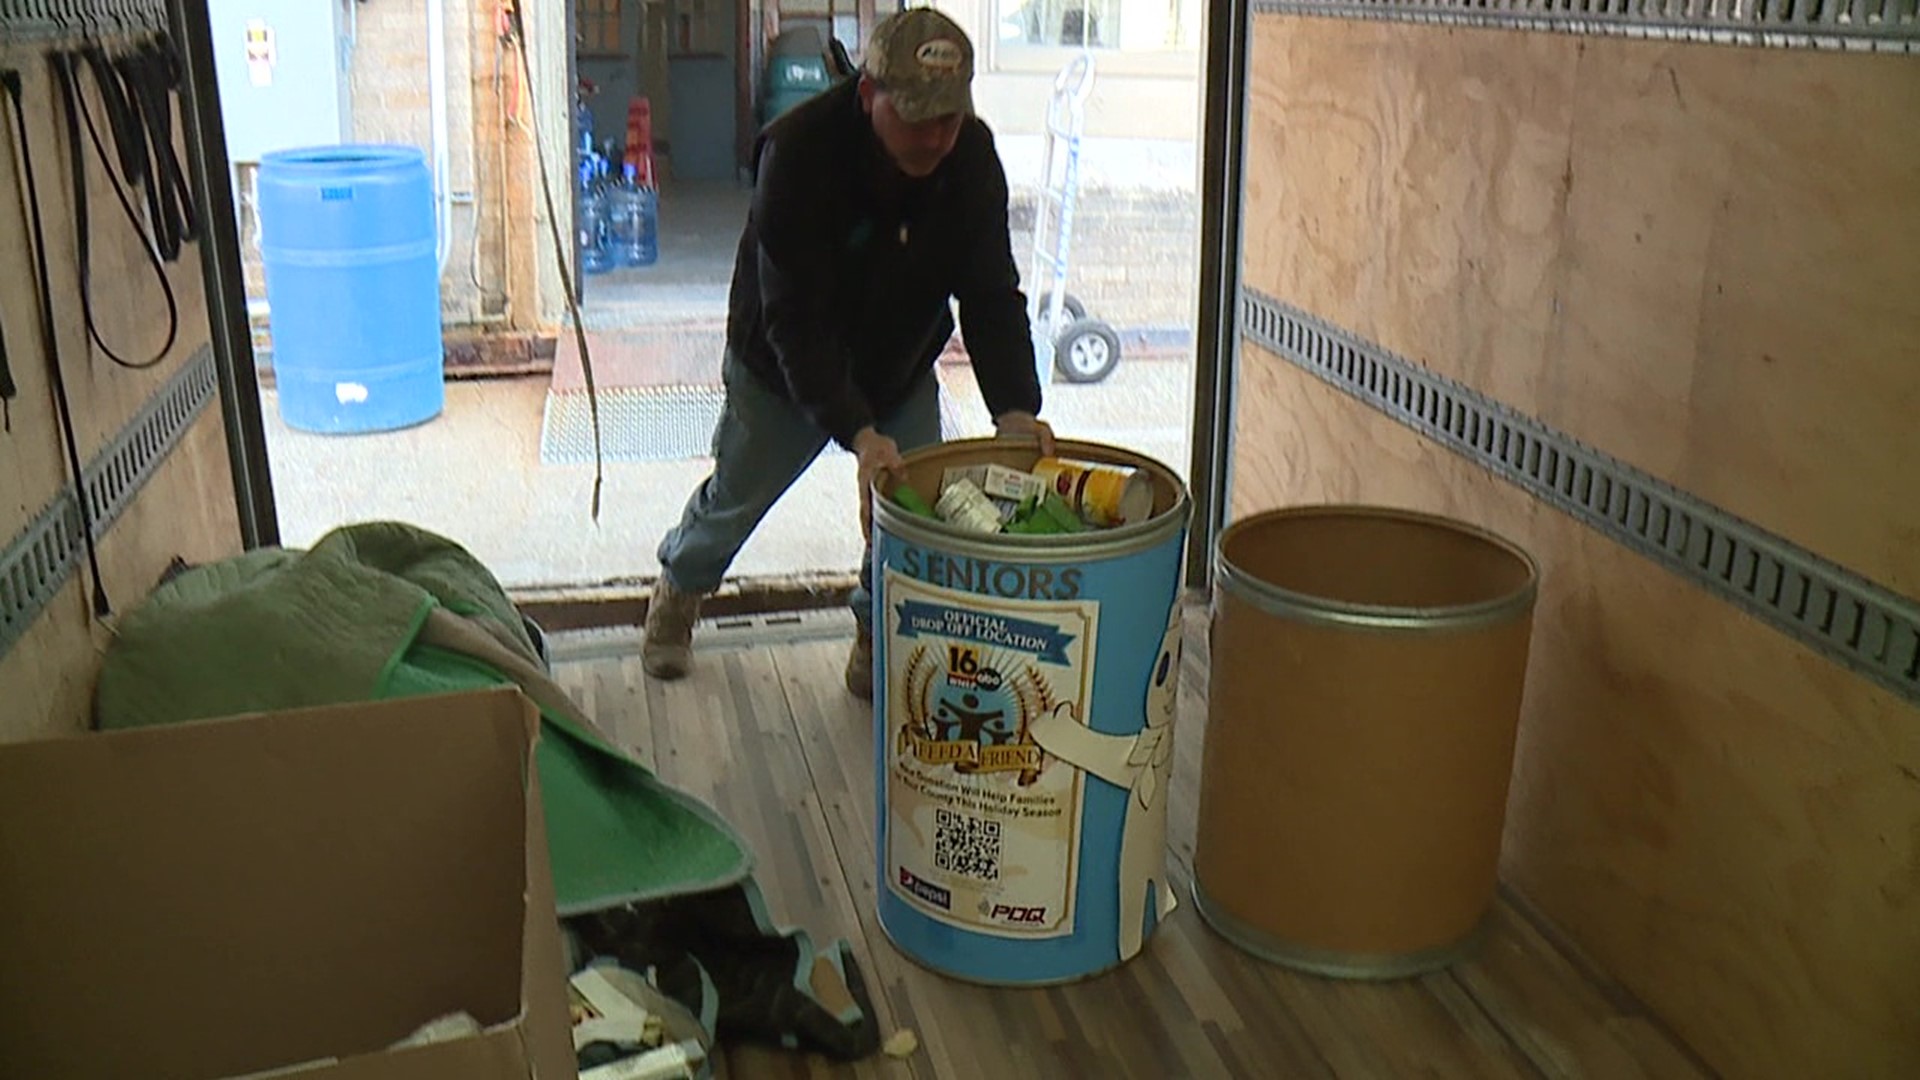 WNEP's Feed a Friend campaign is nearing its end, and crews have begun collecting all the donations folks have dropped at locations in our area.